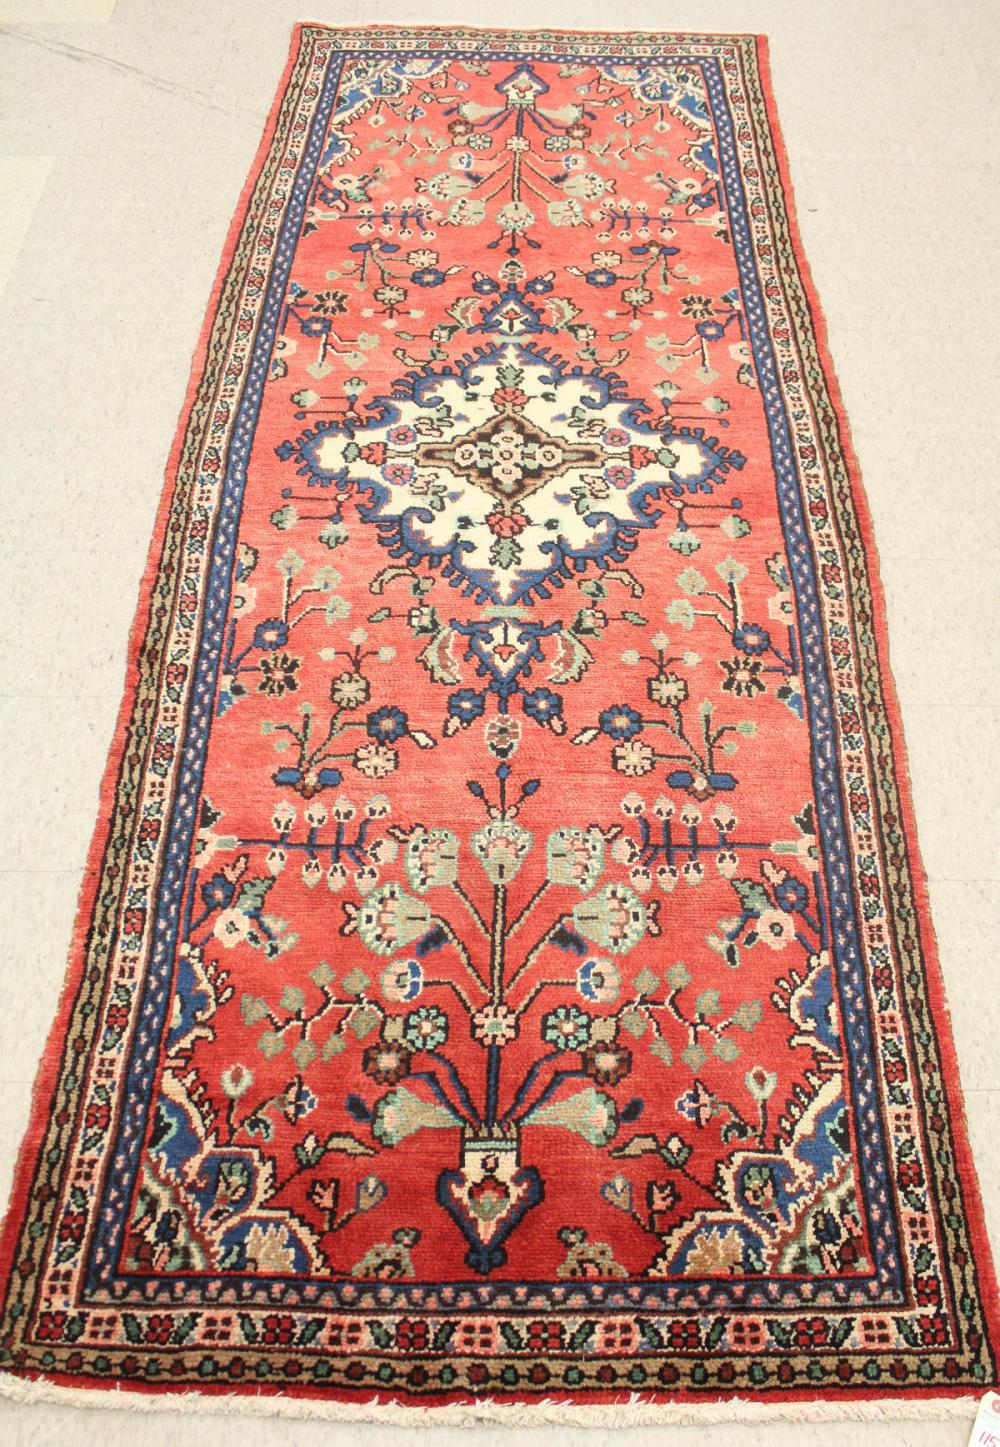 HAND KNOTTED PERSIAN RUG FLORAL 33e80a